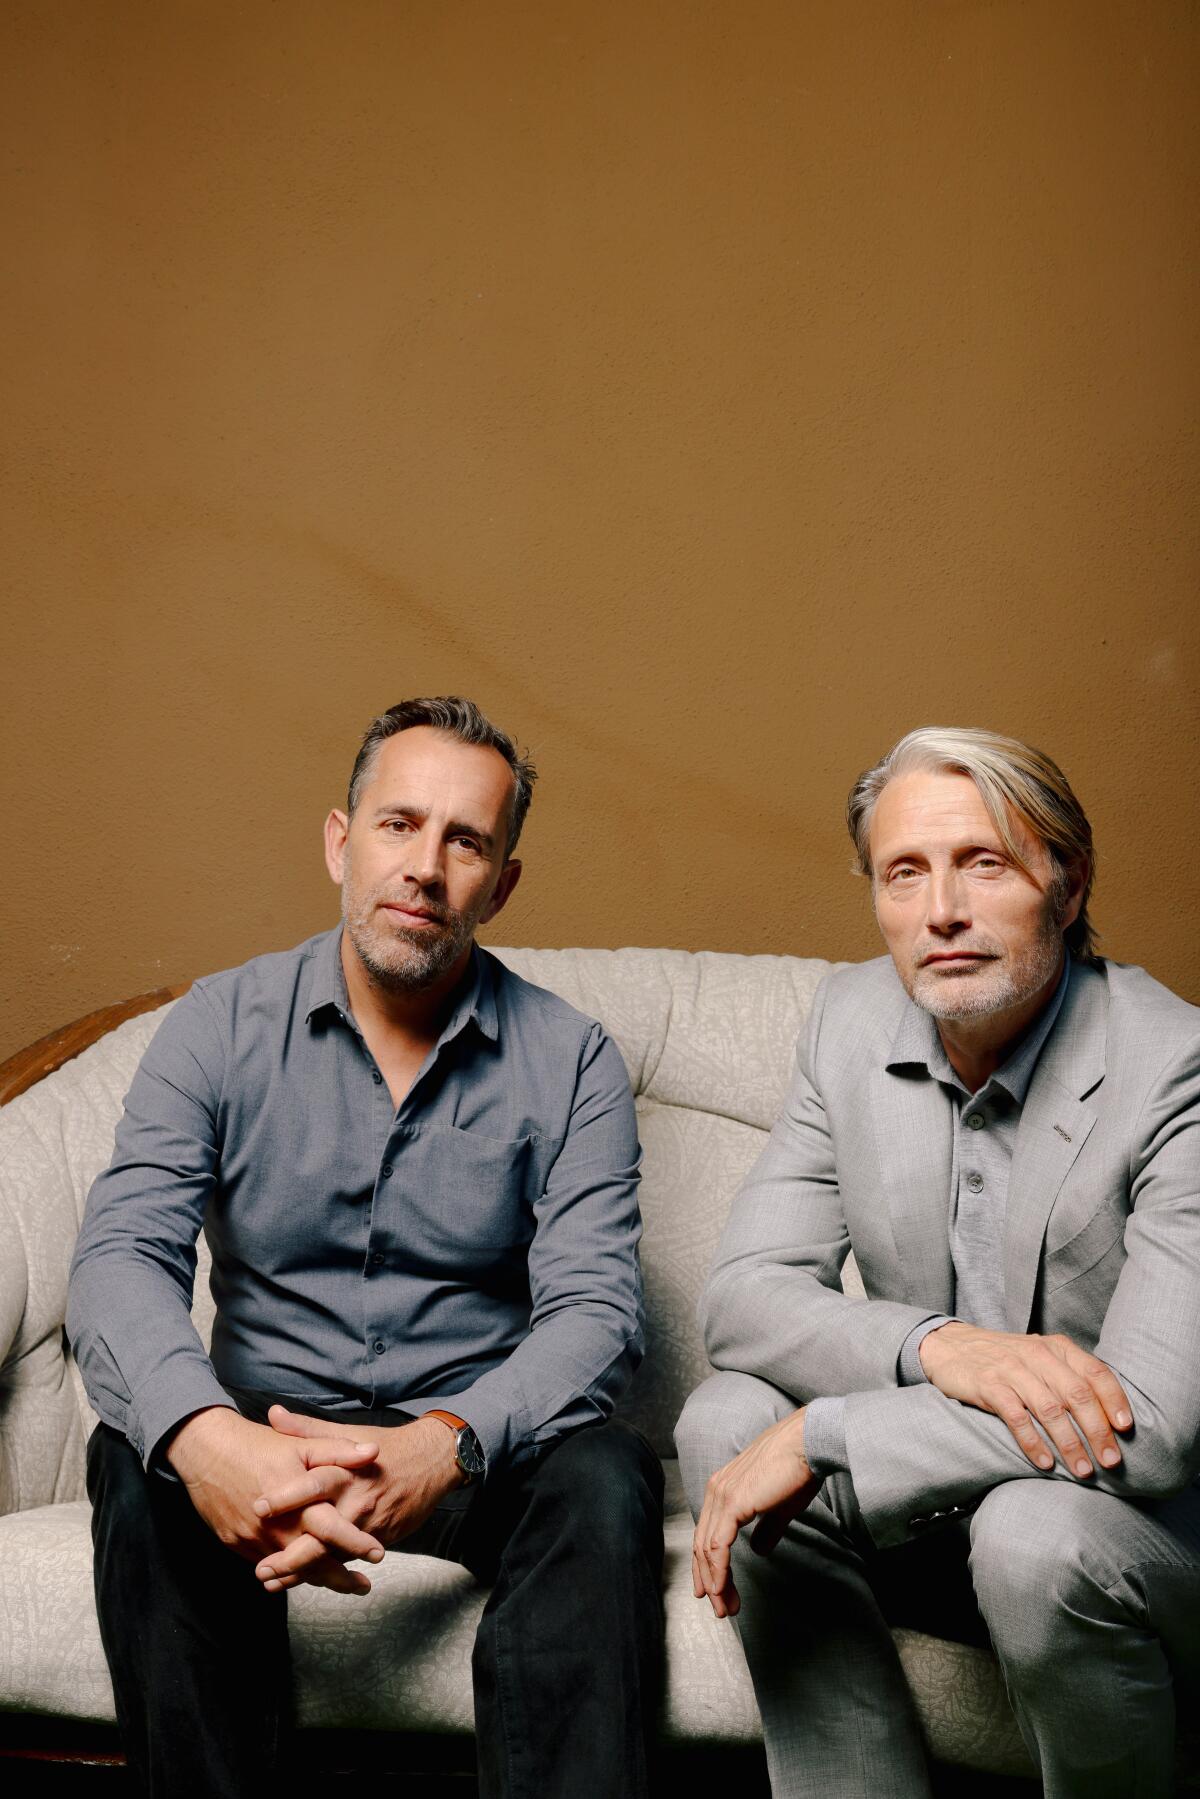 Director Nikolaj Arcel and actor Mads Mikkelsen sit on a couch and look intently at the camera.